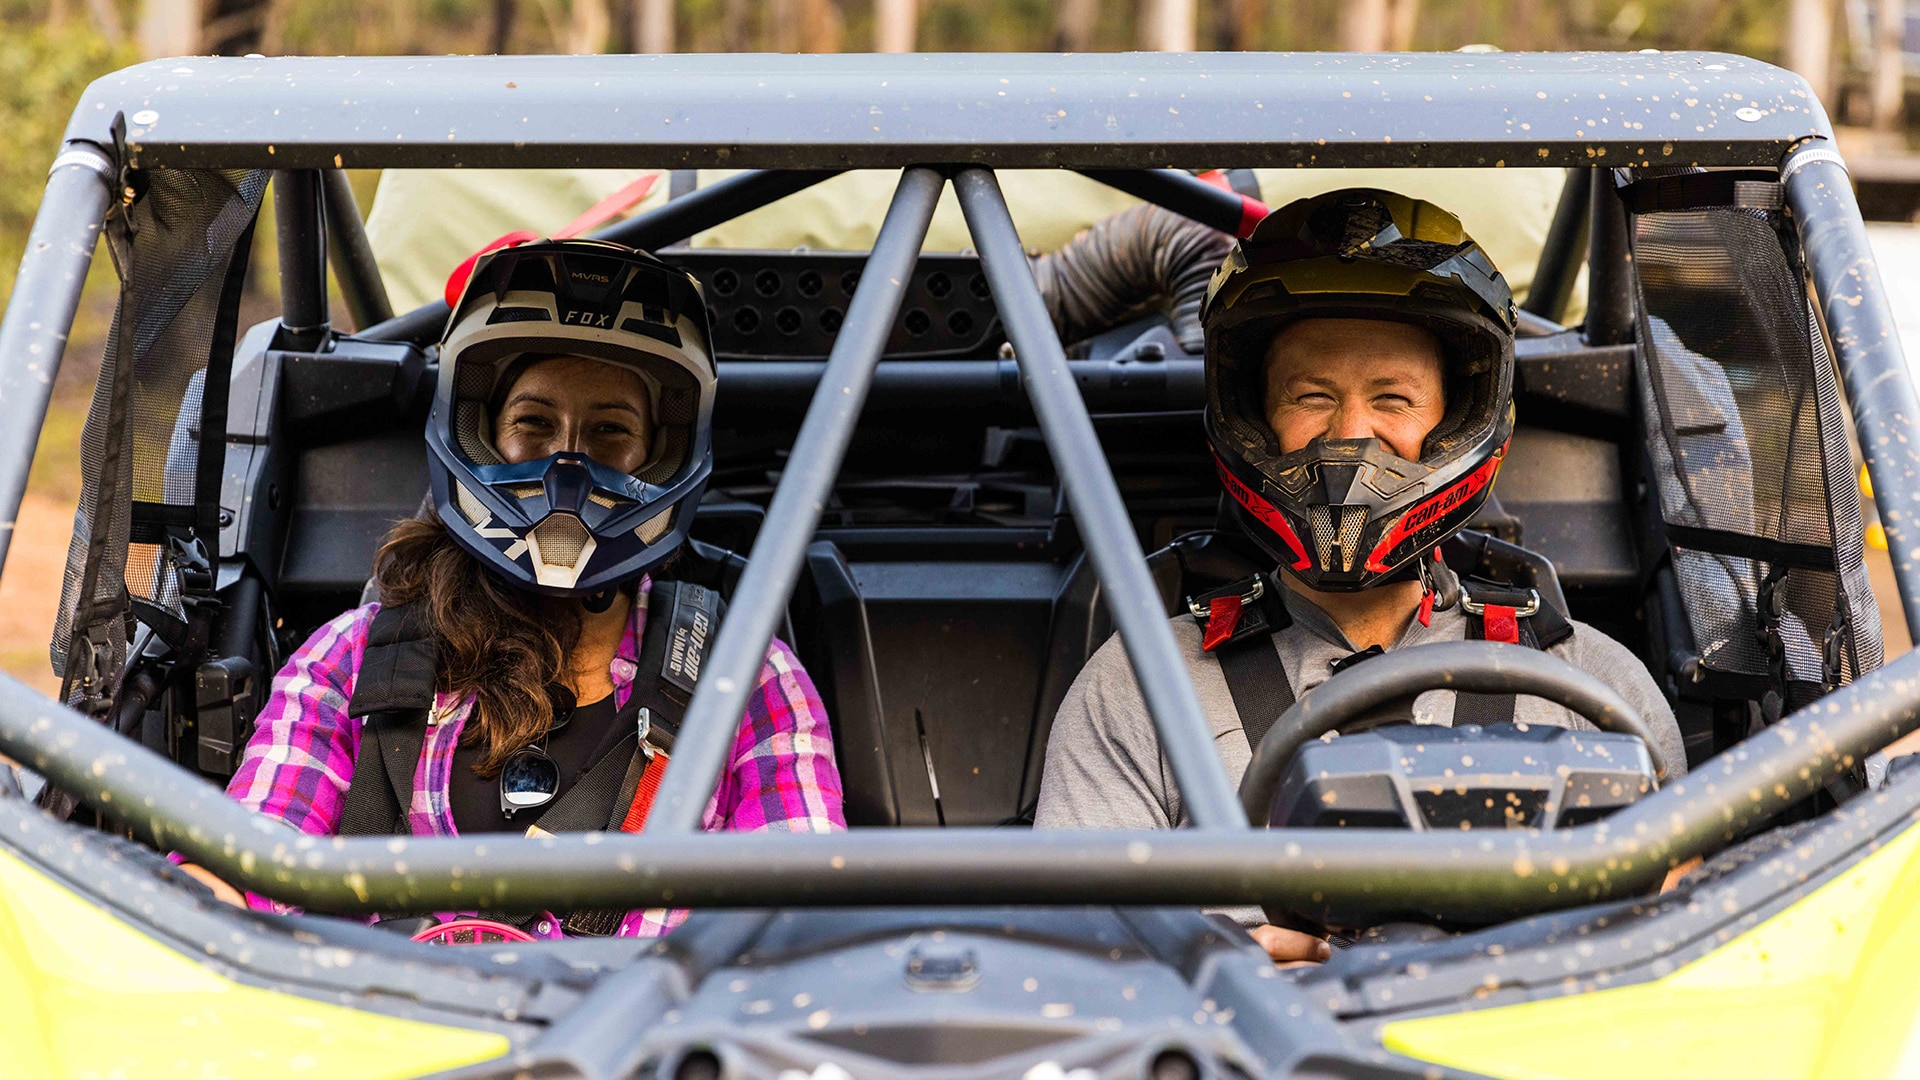 Two riders smiling in a Can-Am SxS